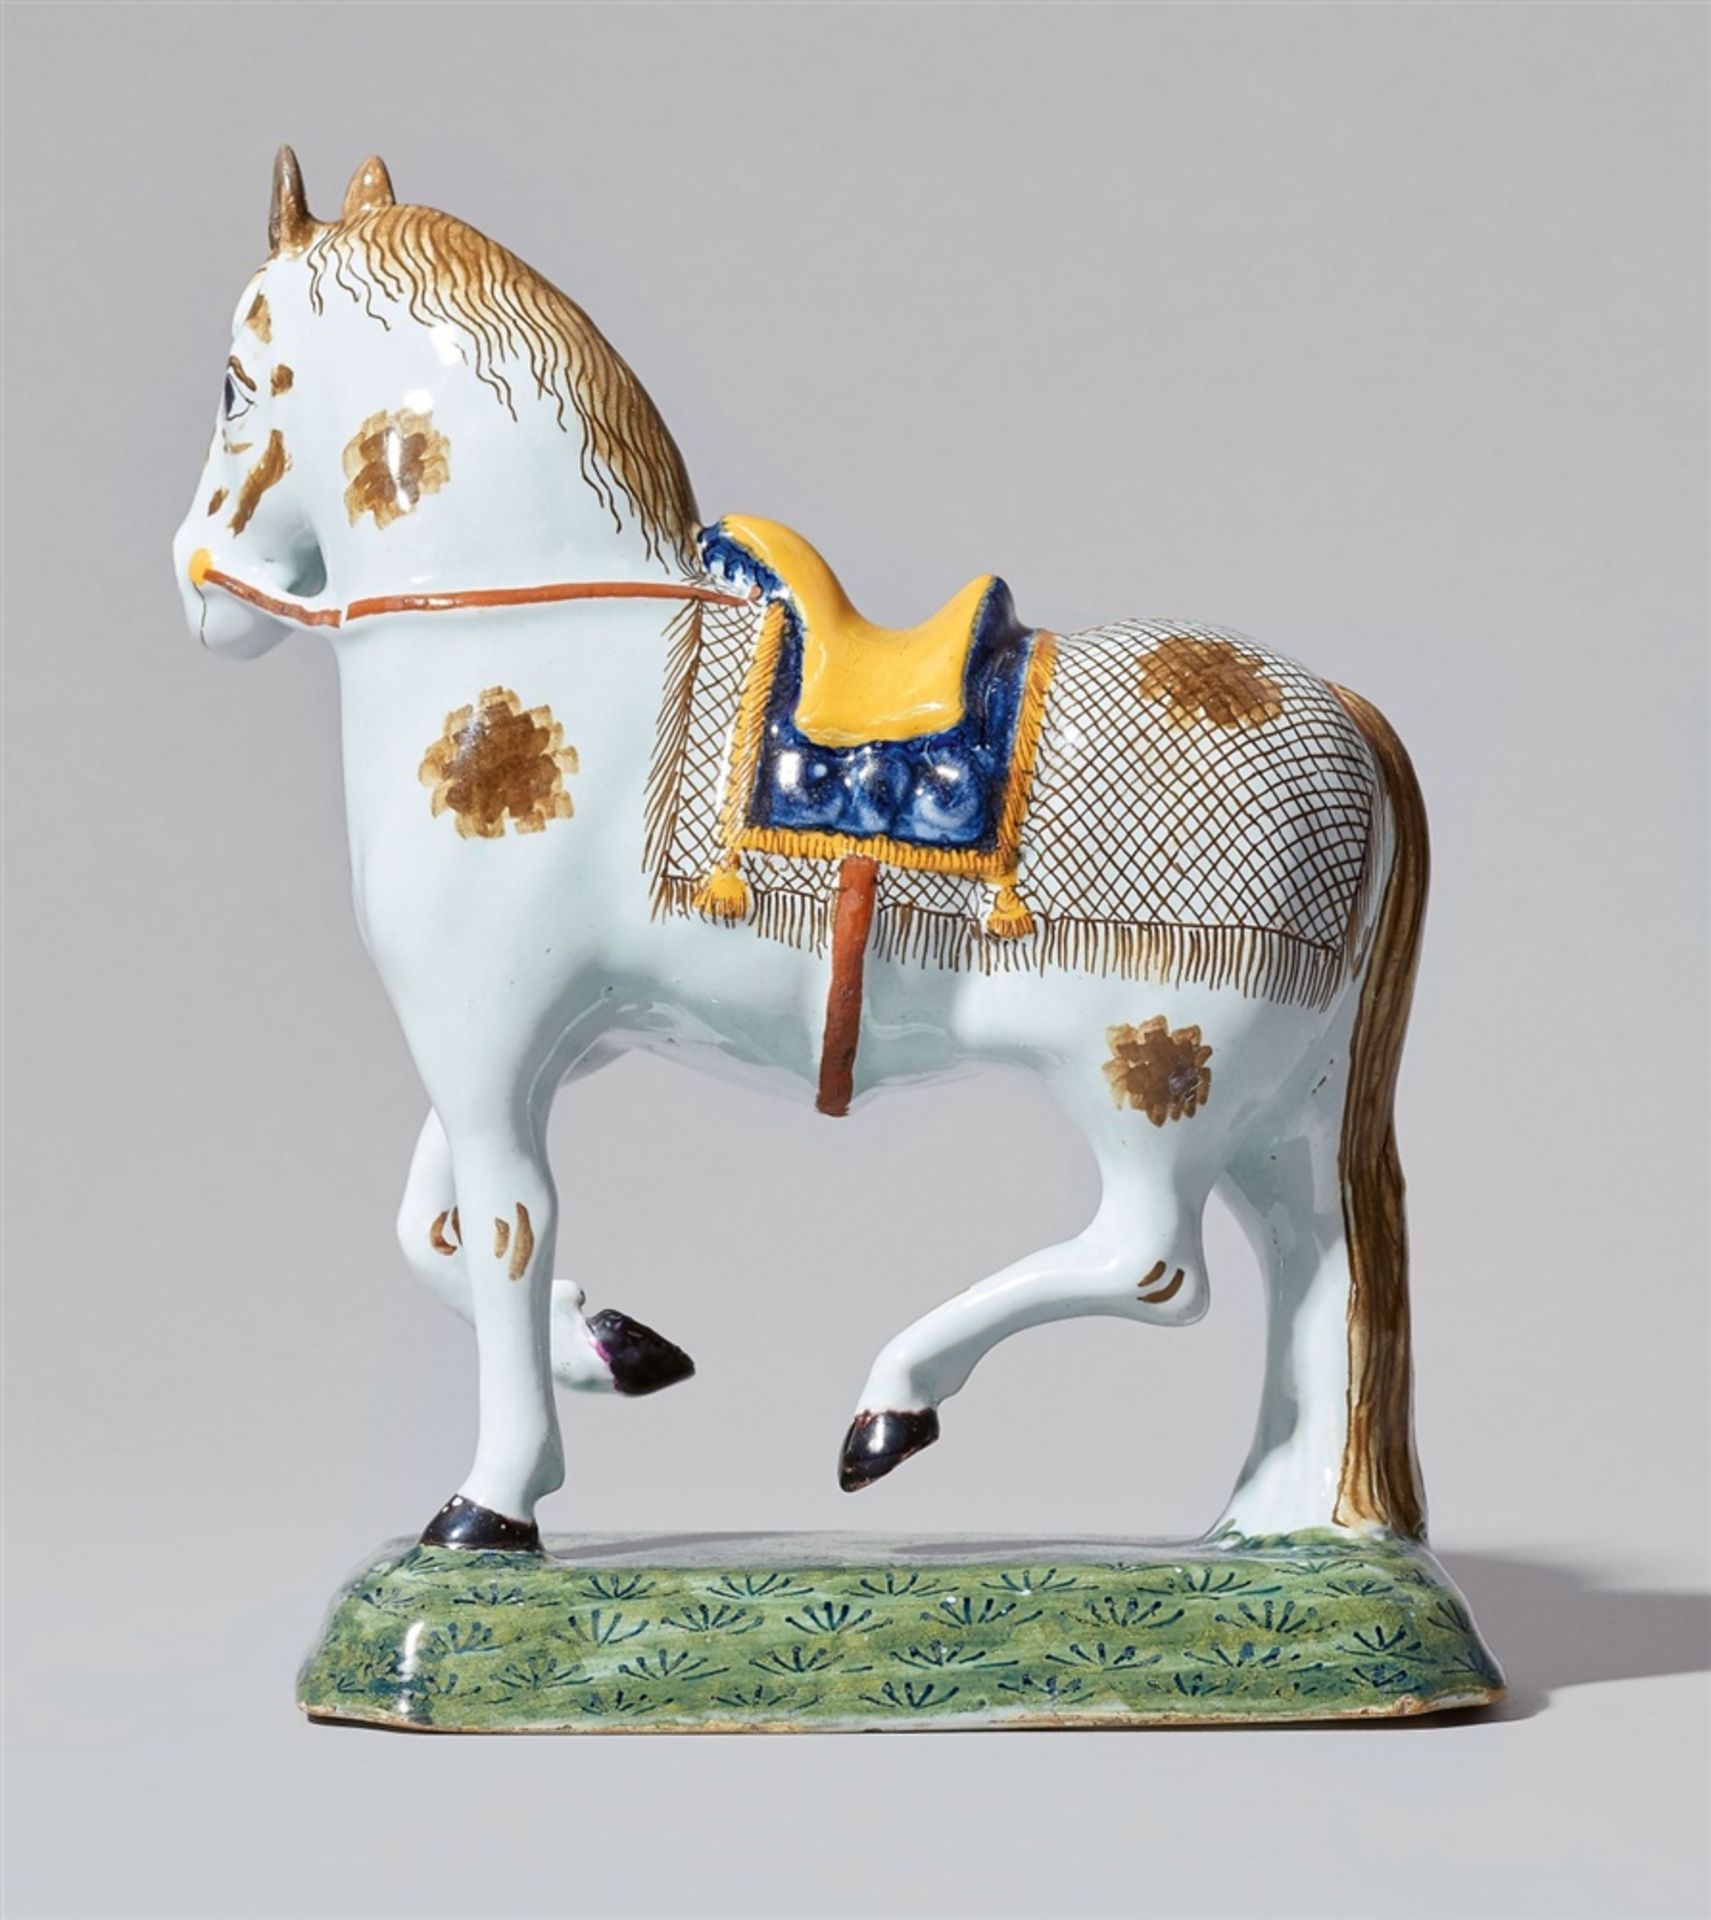 A Delftware faience model of a striding horseA horse with saddle, blanket and bridle on an oblong - Bild 2 aus 2